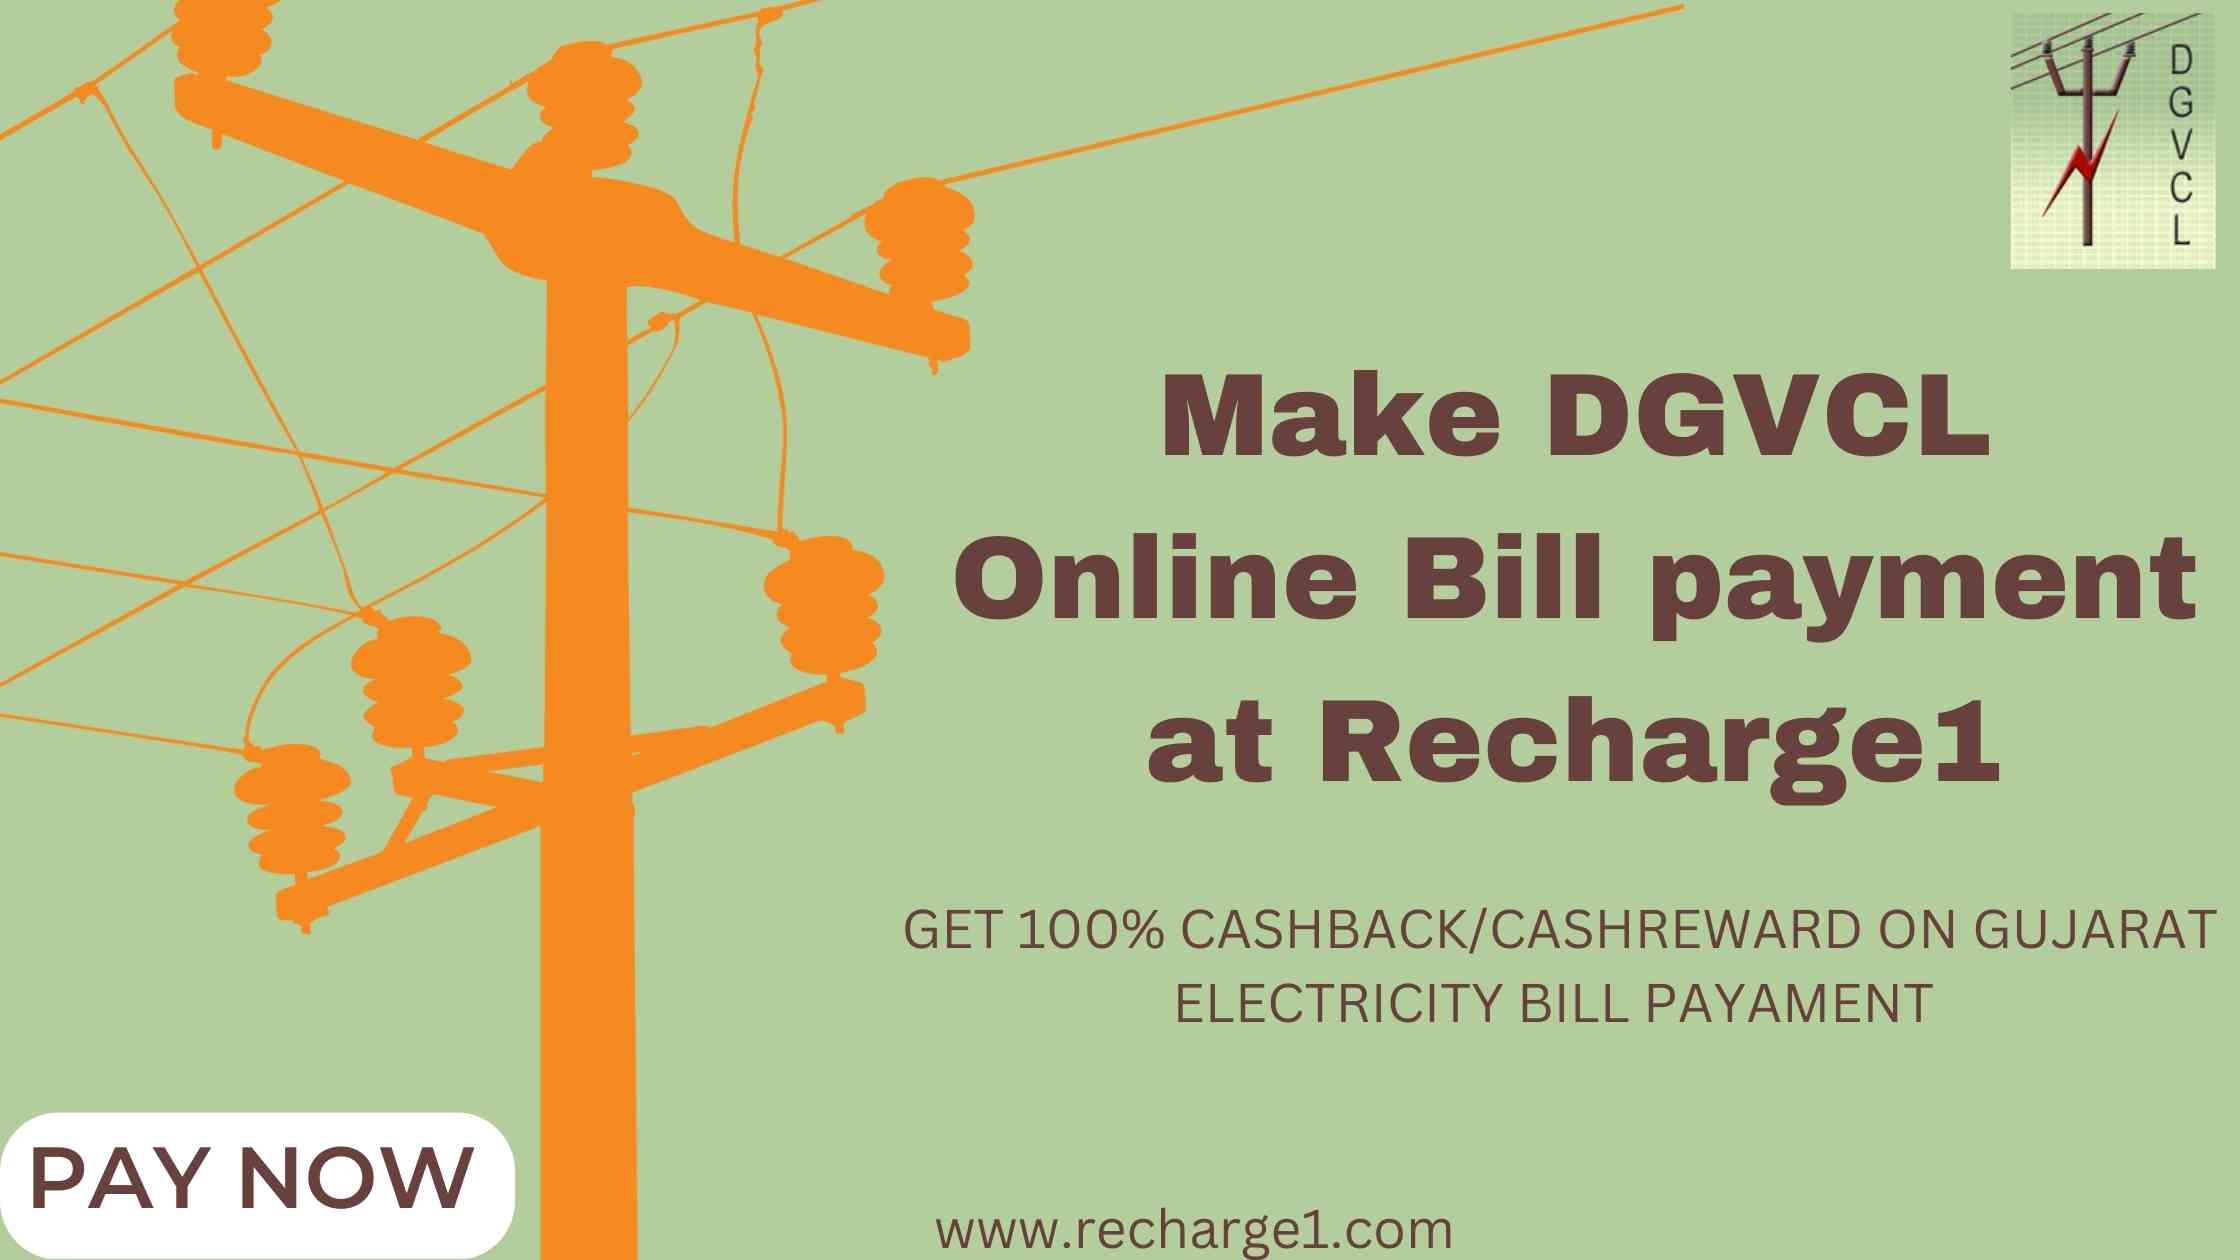 DGVCL Online Bill PaymentOtherAnnouncementsAll Indiaother